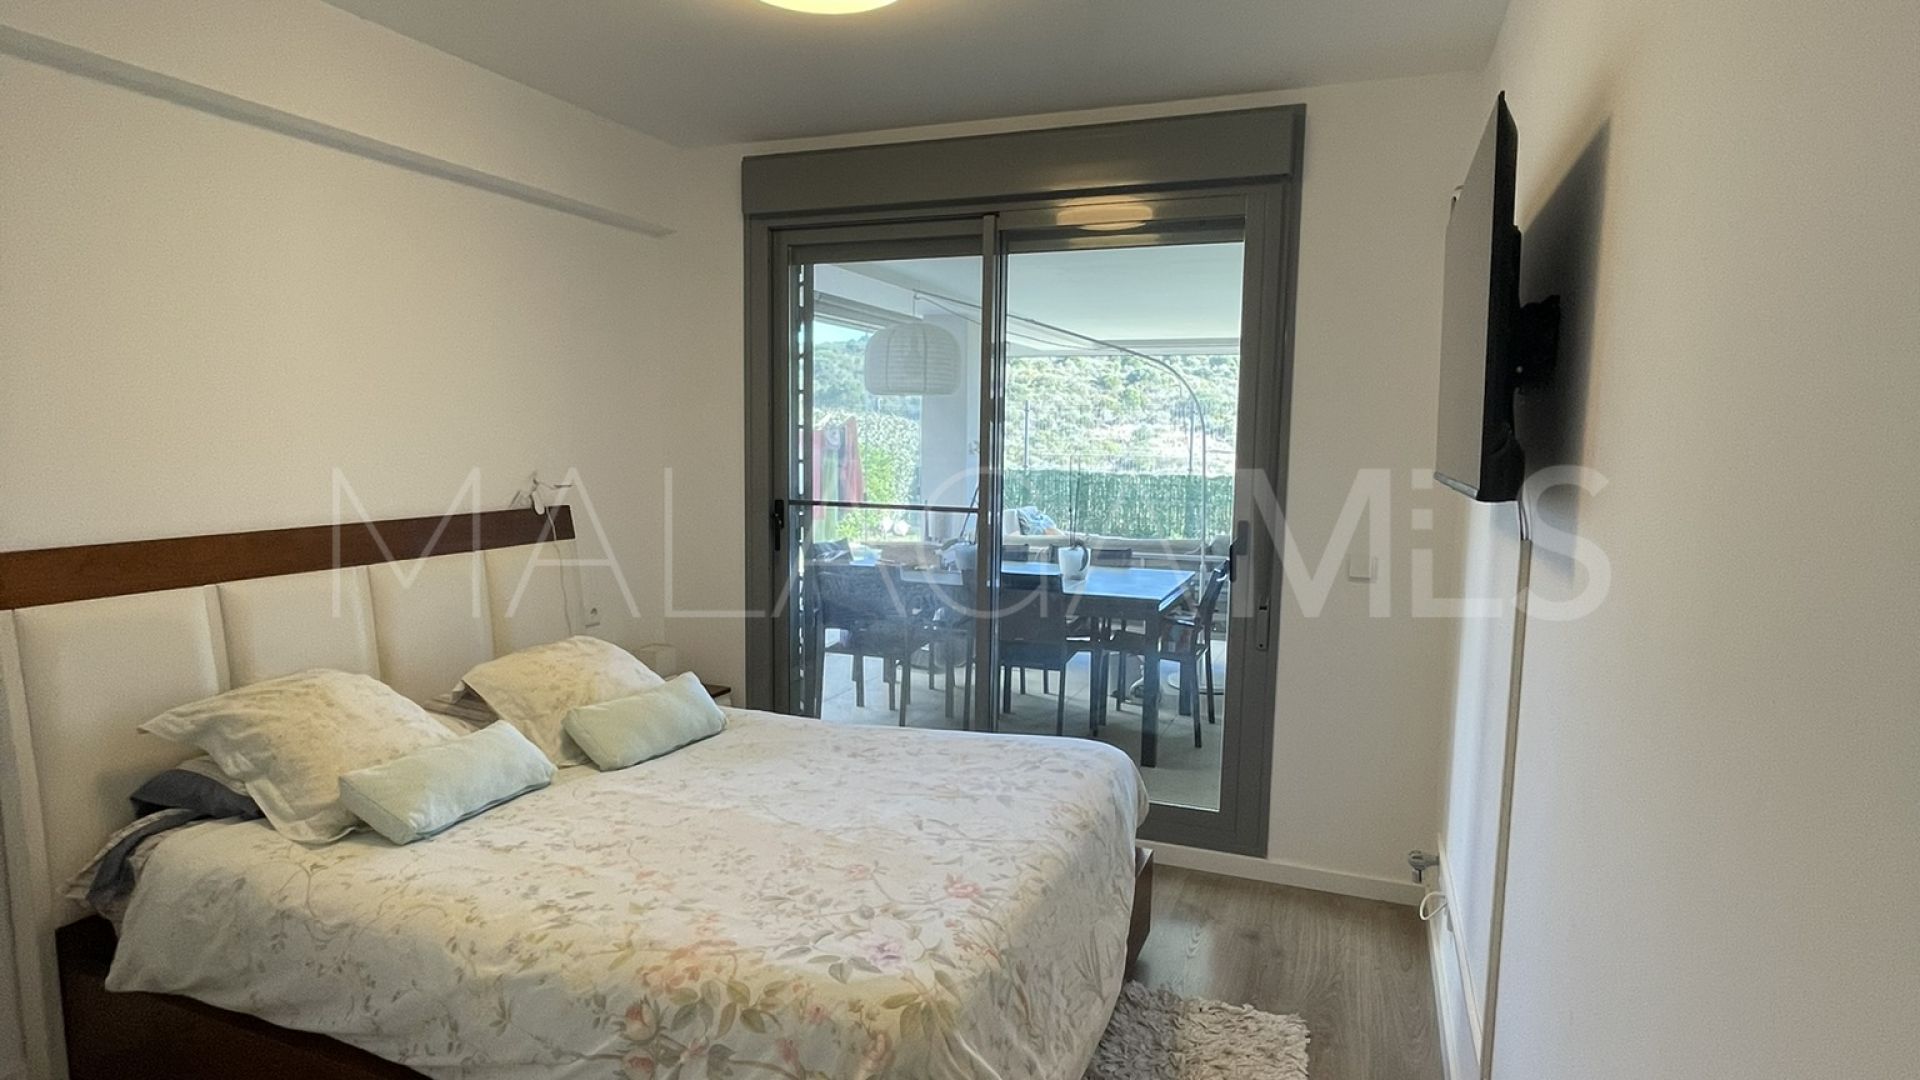 3 bedrooms Serenity Views ground floor apartment for sale